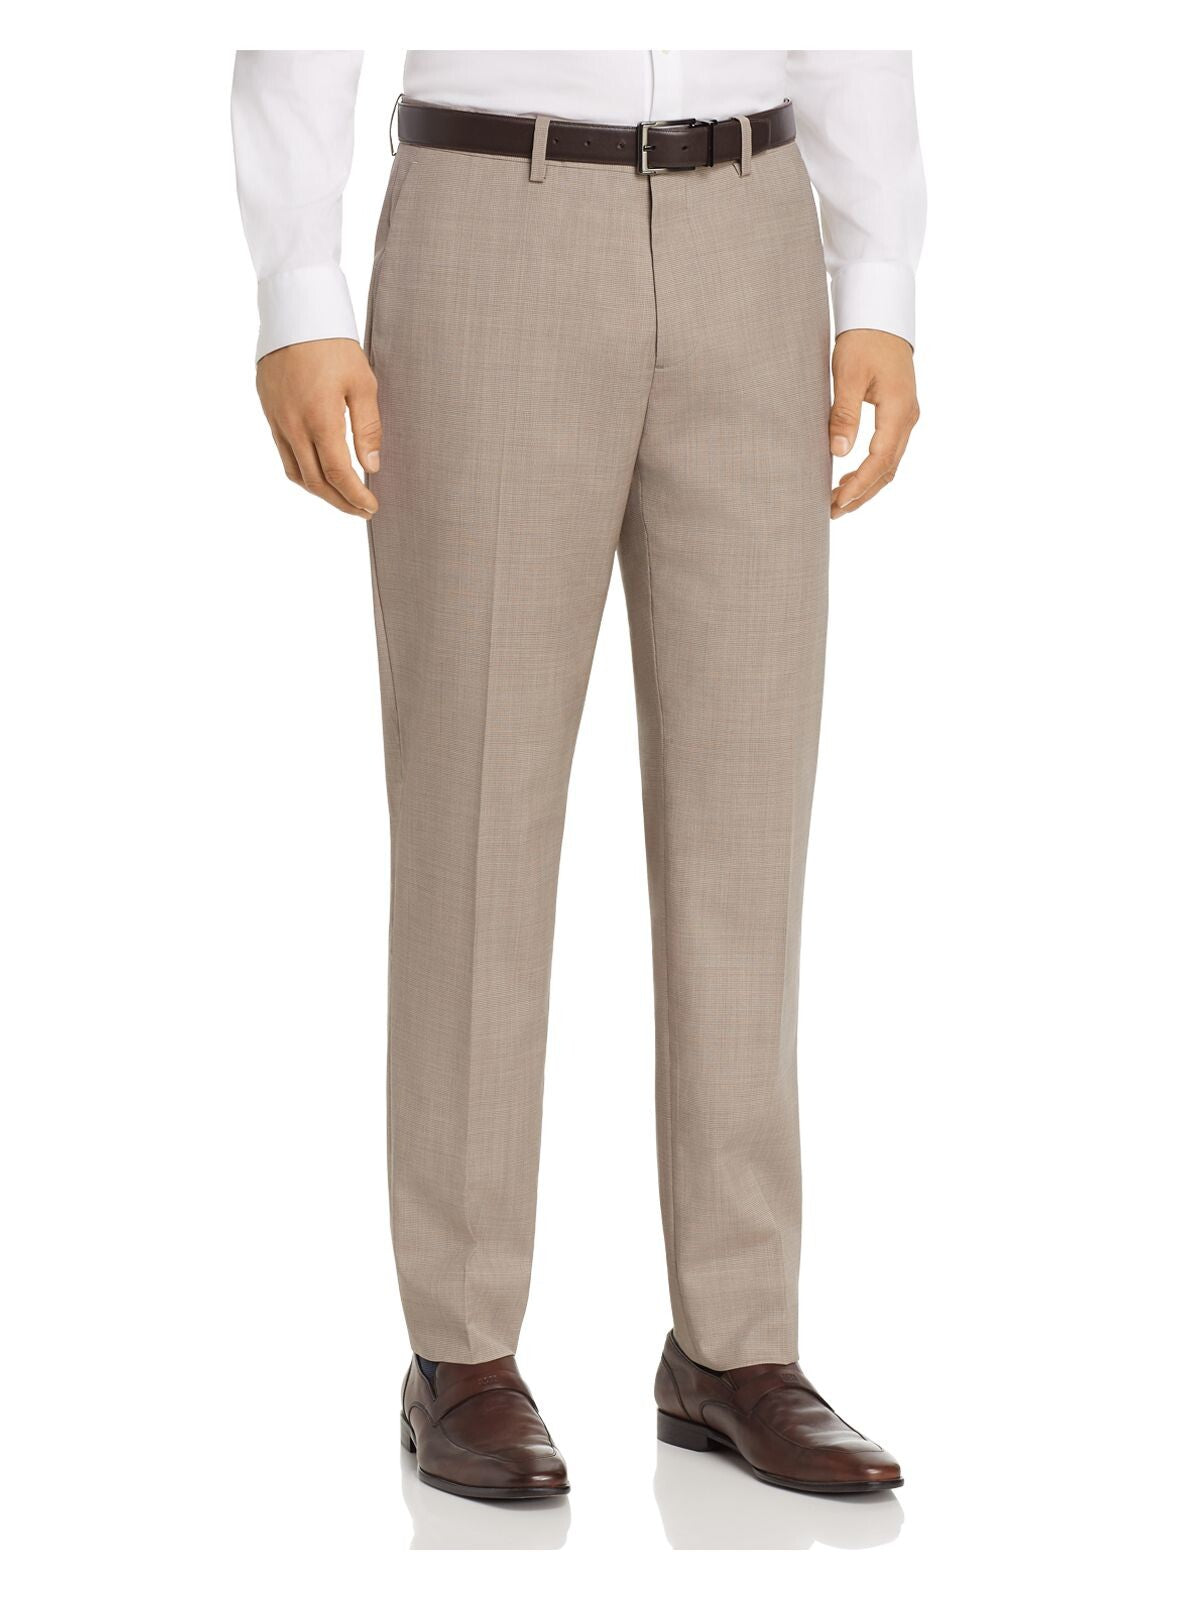 THEORY Mens Beige Flat Front, Stretch, Slim Fit Pants 36